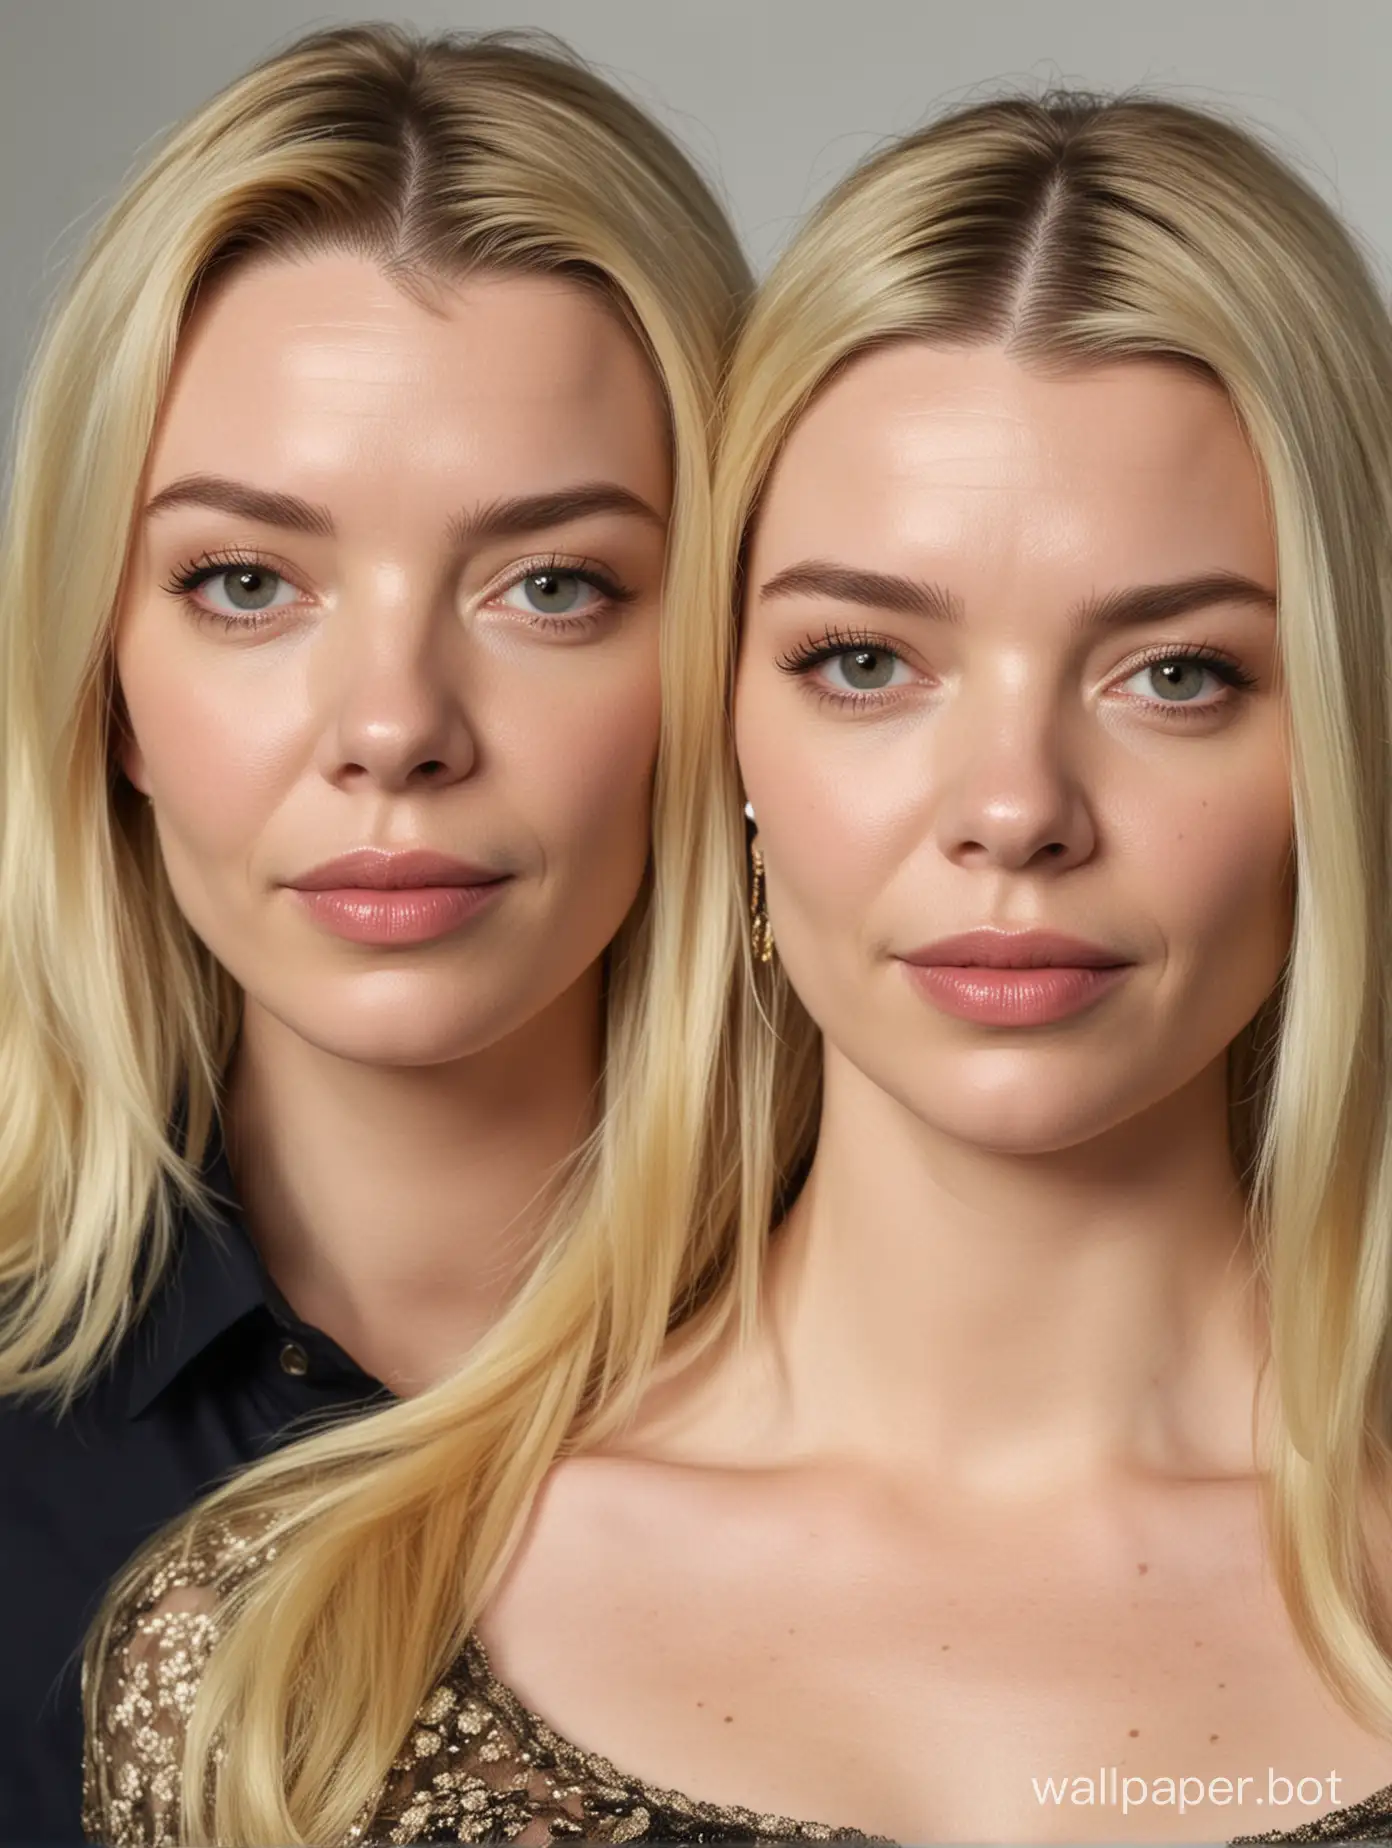 Anya taylor joy as 60 years old woman with her adult son, long blonde hair